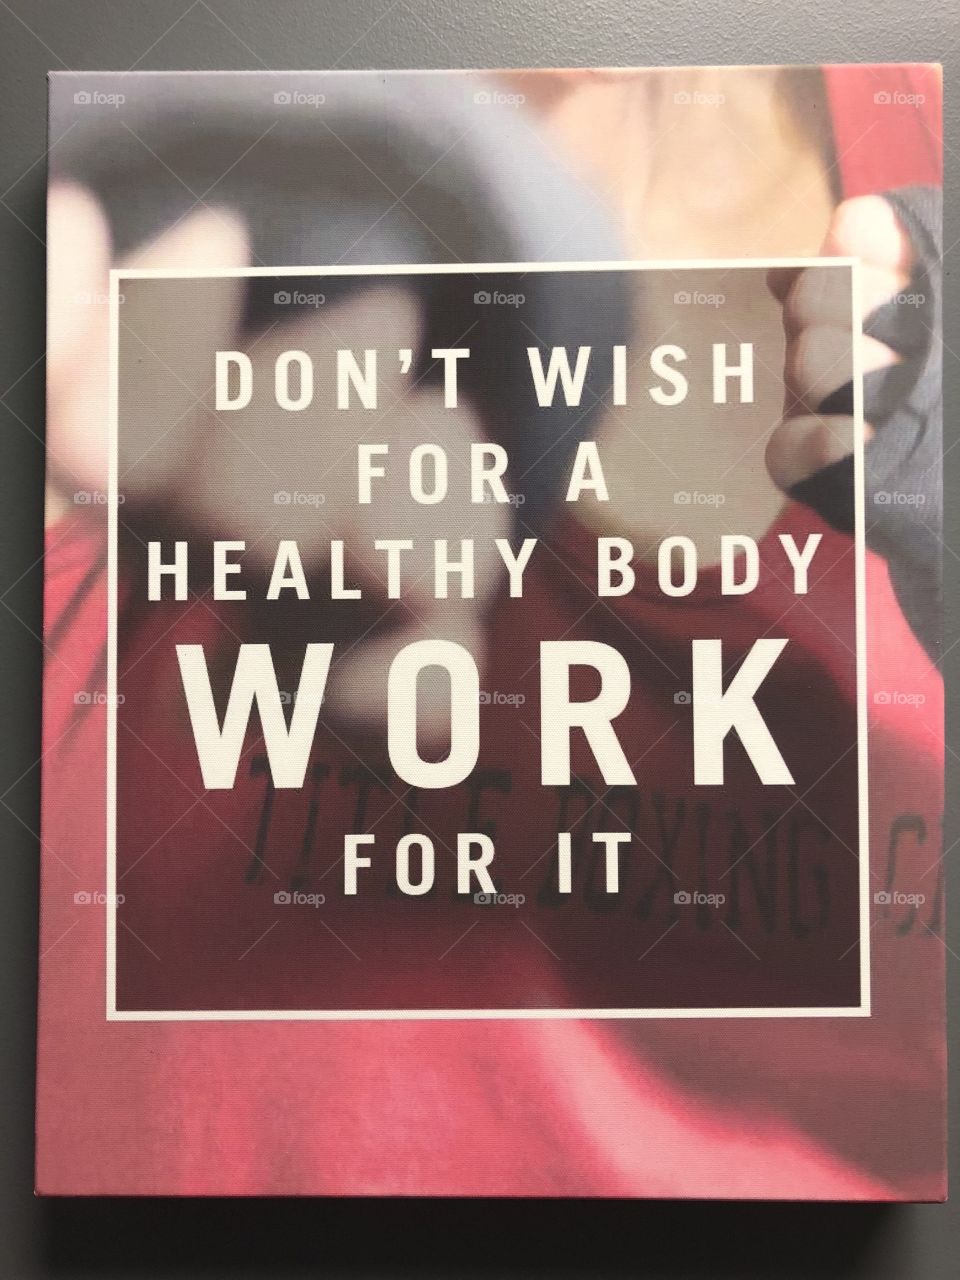 Don’t wish for a healthy body, work for it 